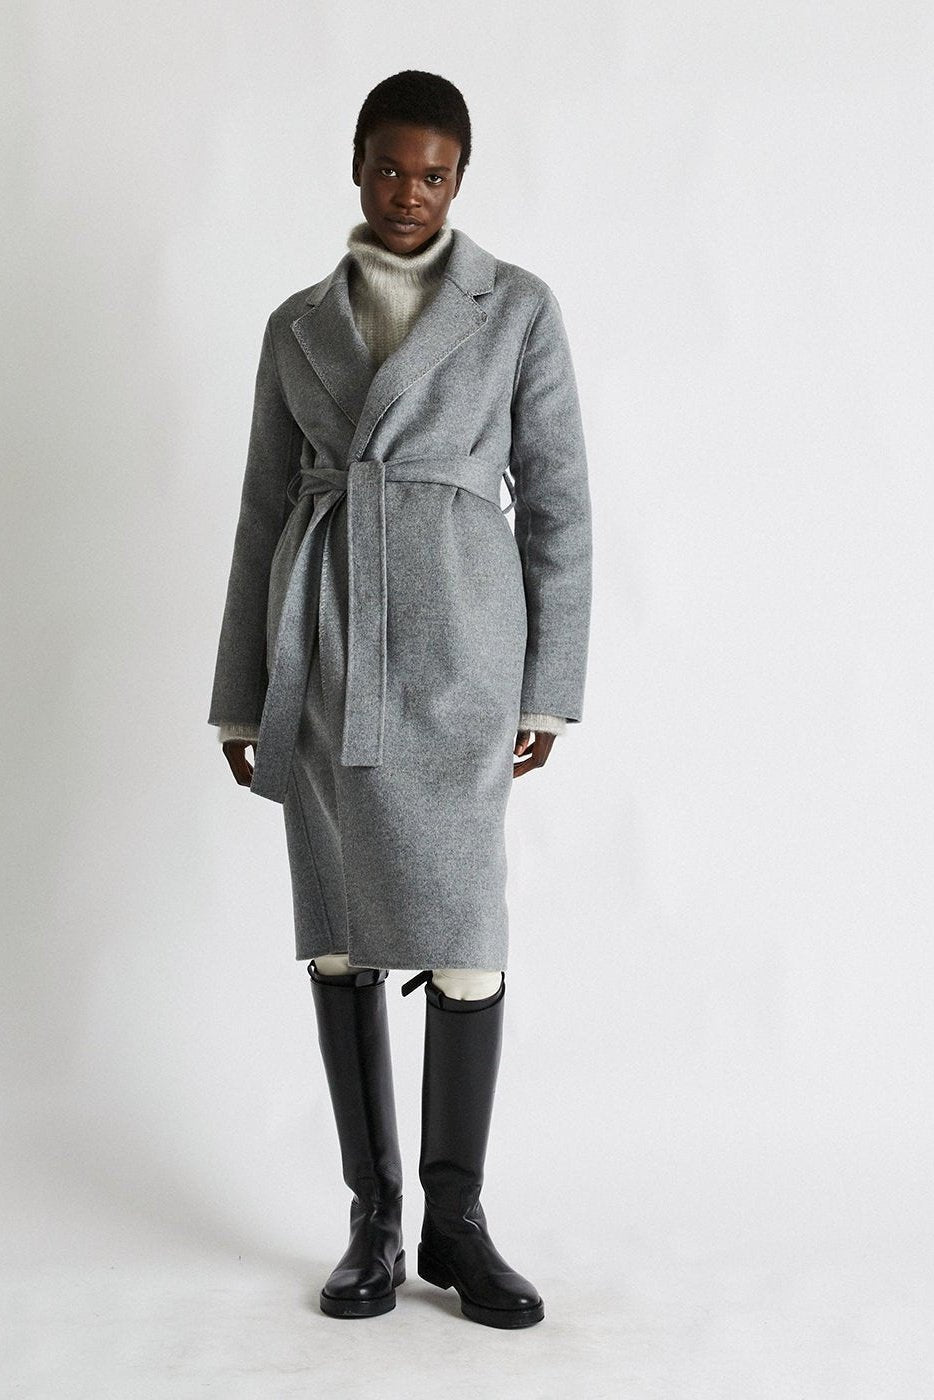 +Beryll Cashmere Trench Coat - +Beryll Cashmere Trench Coat - +Beryll Worn By Good People